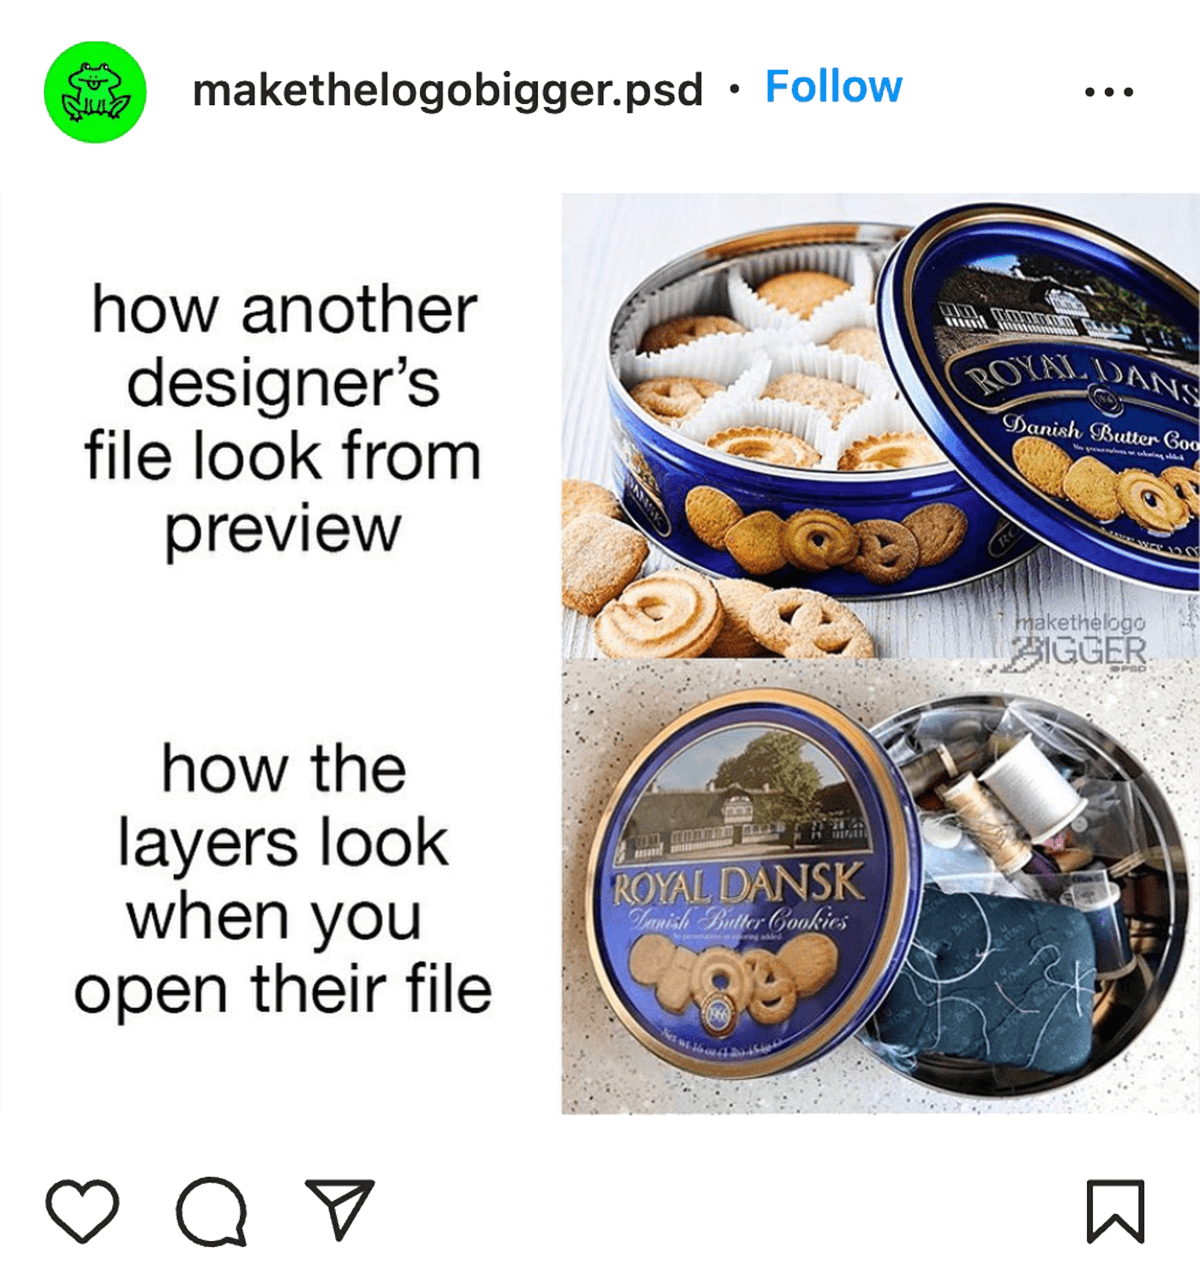 makethelogobigger.psd on instagram - how another designer's file look from preview vs how the layers look when you open their file